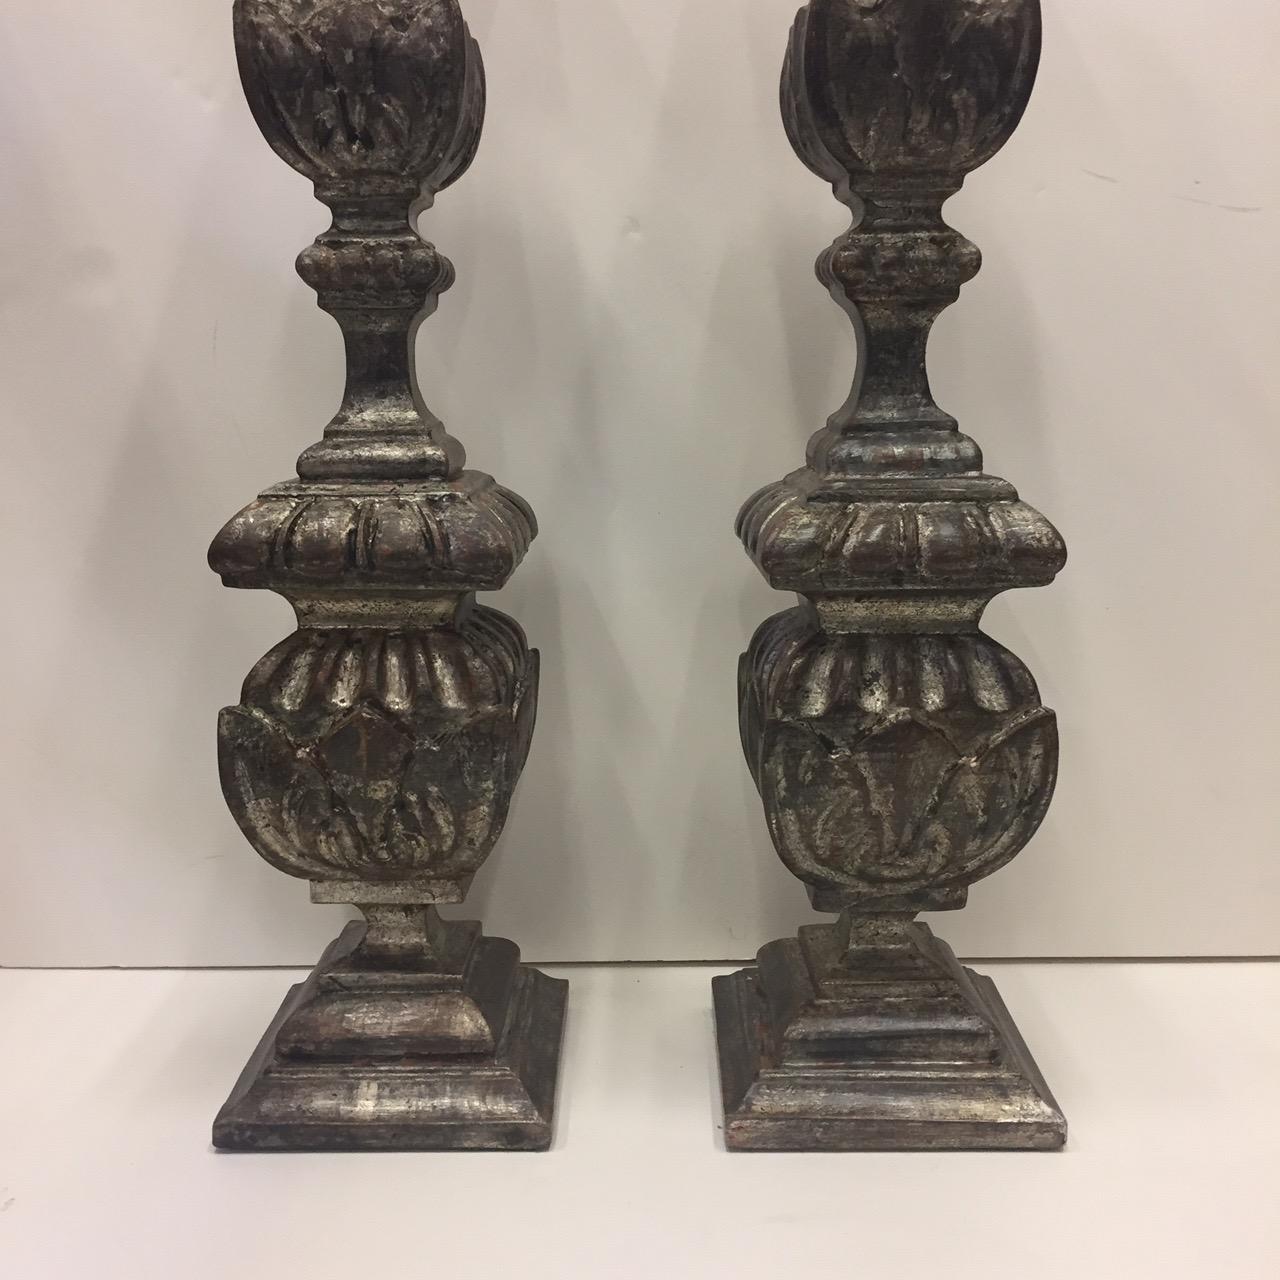 Impressive tall pair of 19th century silver leaf pricket candlestick table lamps having authentic aged patina.
No shades.